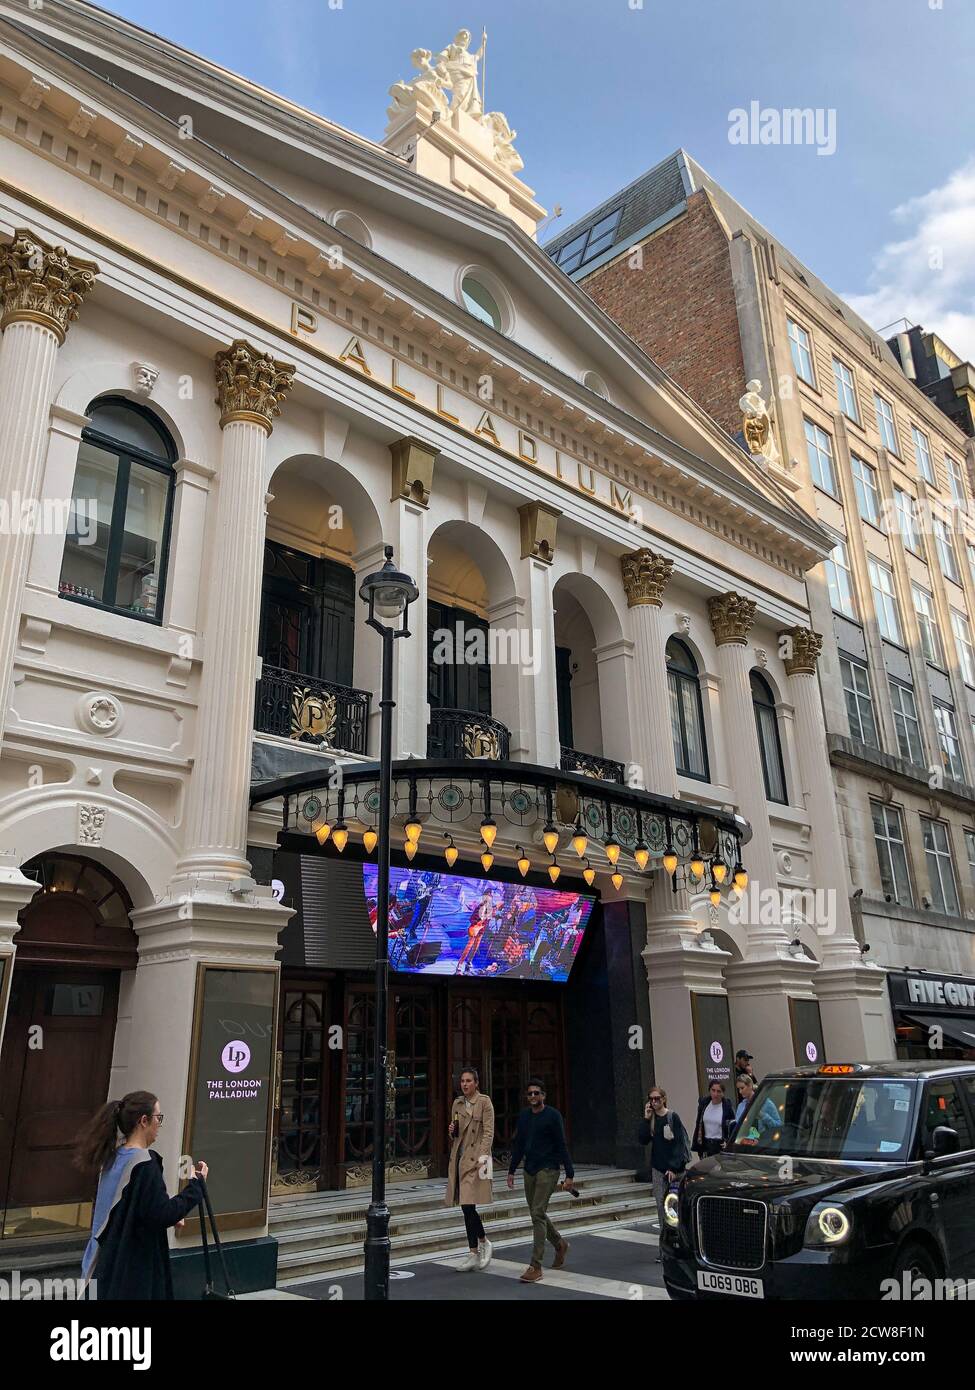 The London Palladium theatre remains closed since 16th March 2020 as a result of the COVID-19 pandemic. Its owners have tested, and plan to implement, extensive safety measures to enable performances to recommence as soon as possible. Stock Photo